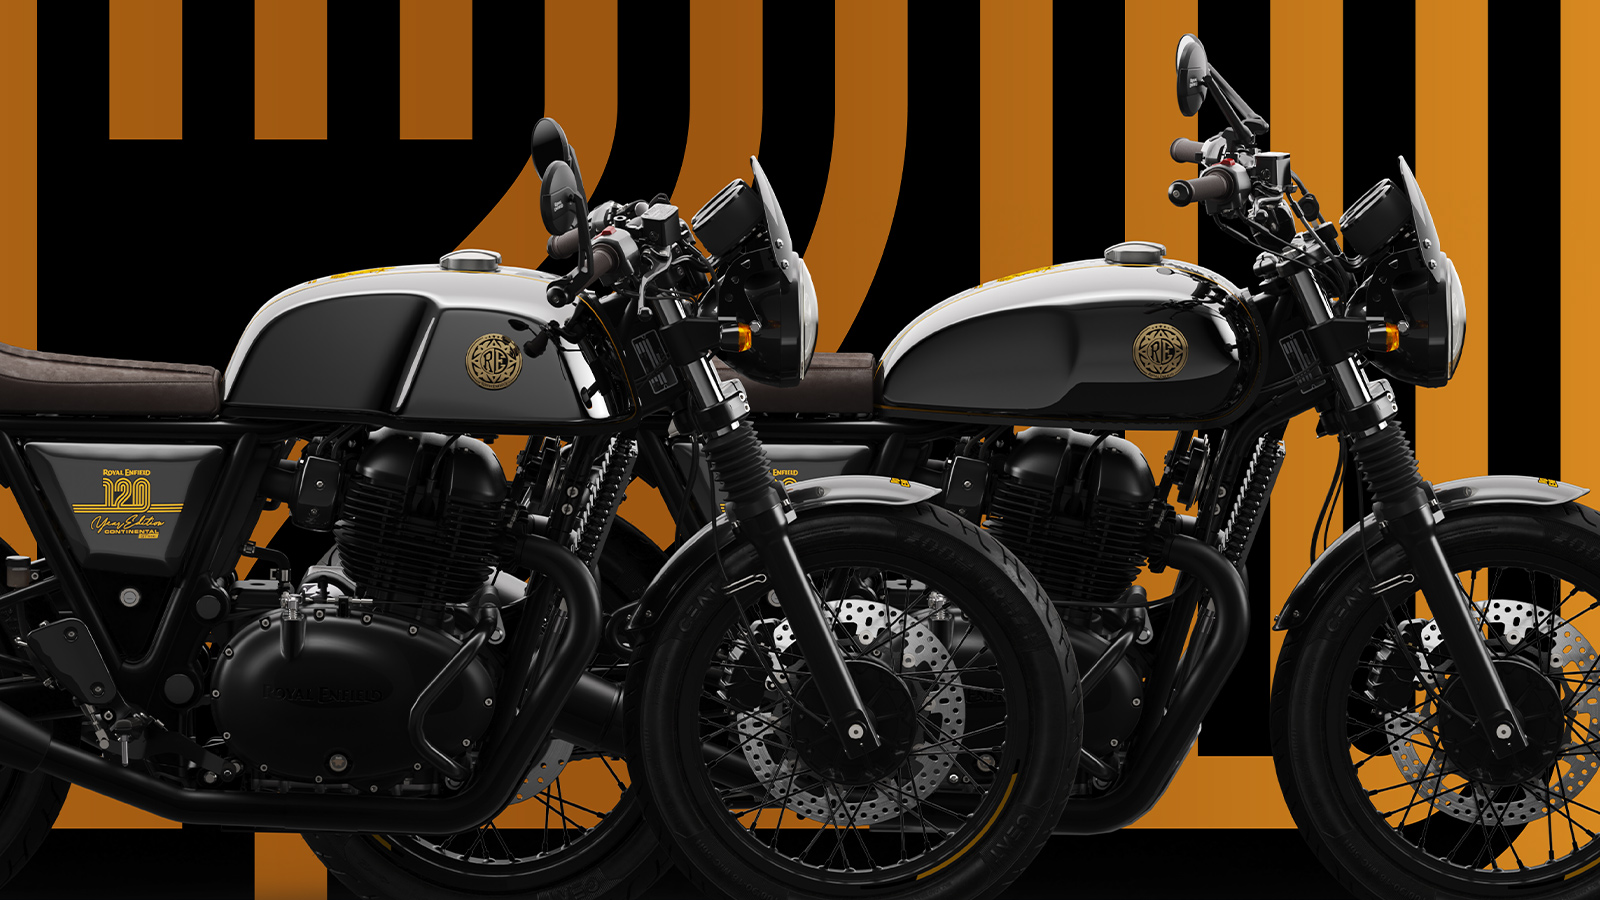 Royal Enfield Celebrates its 120th Anniversary With A Pair Of Black Chrome Twin Motorcycles